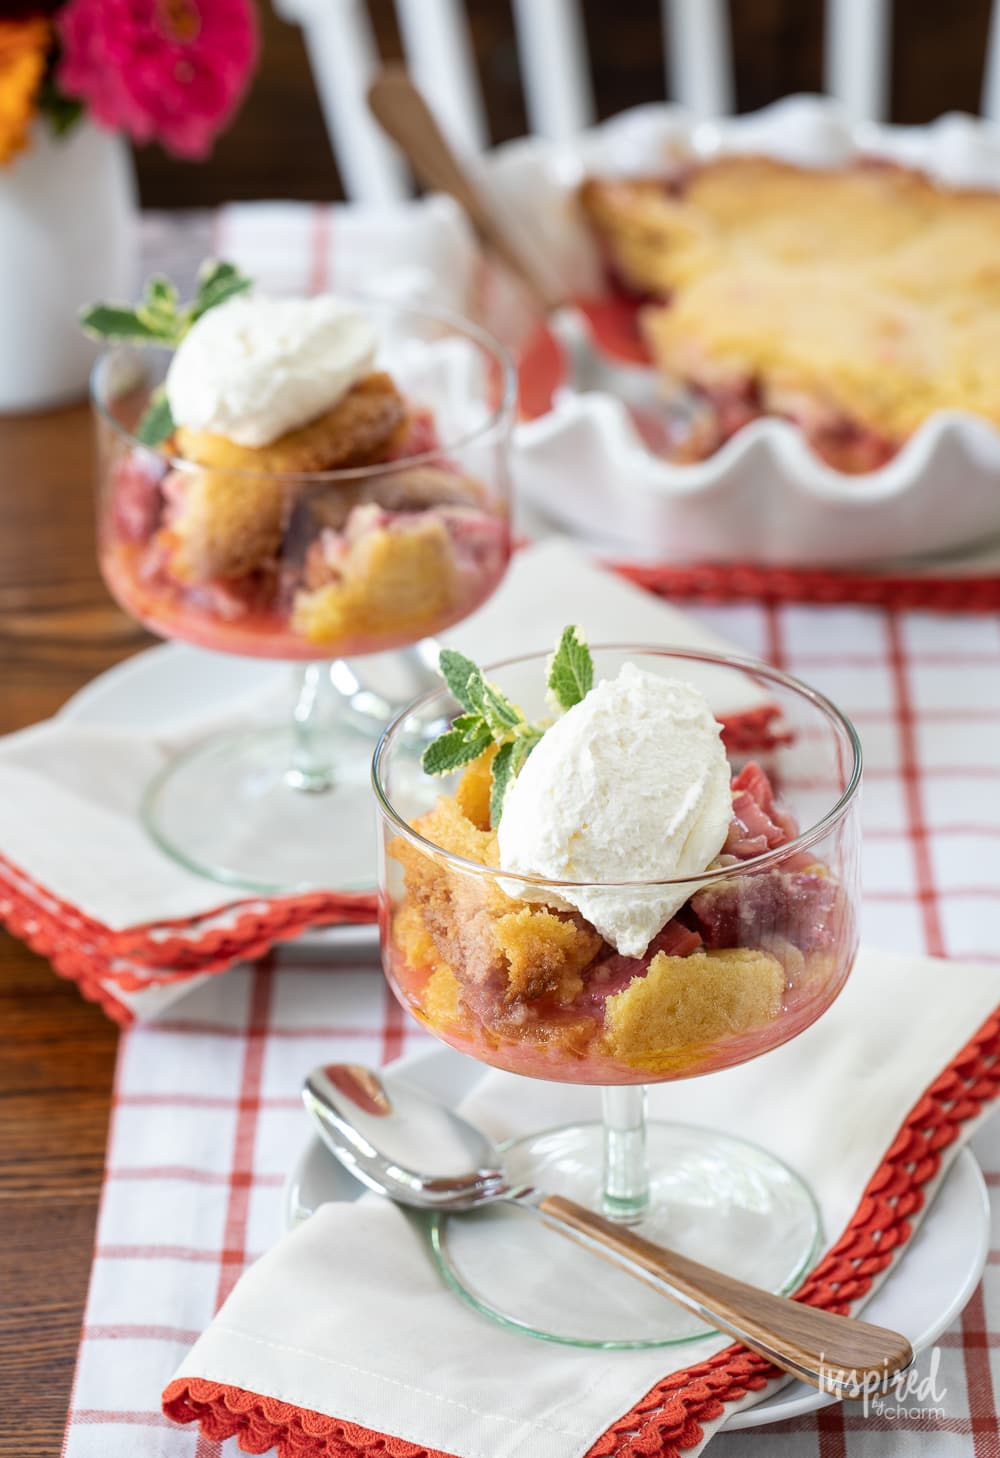 rhubarb cobbler in dishes on plates with napkins.